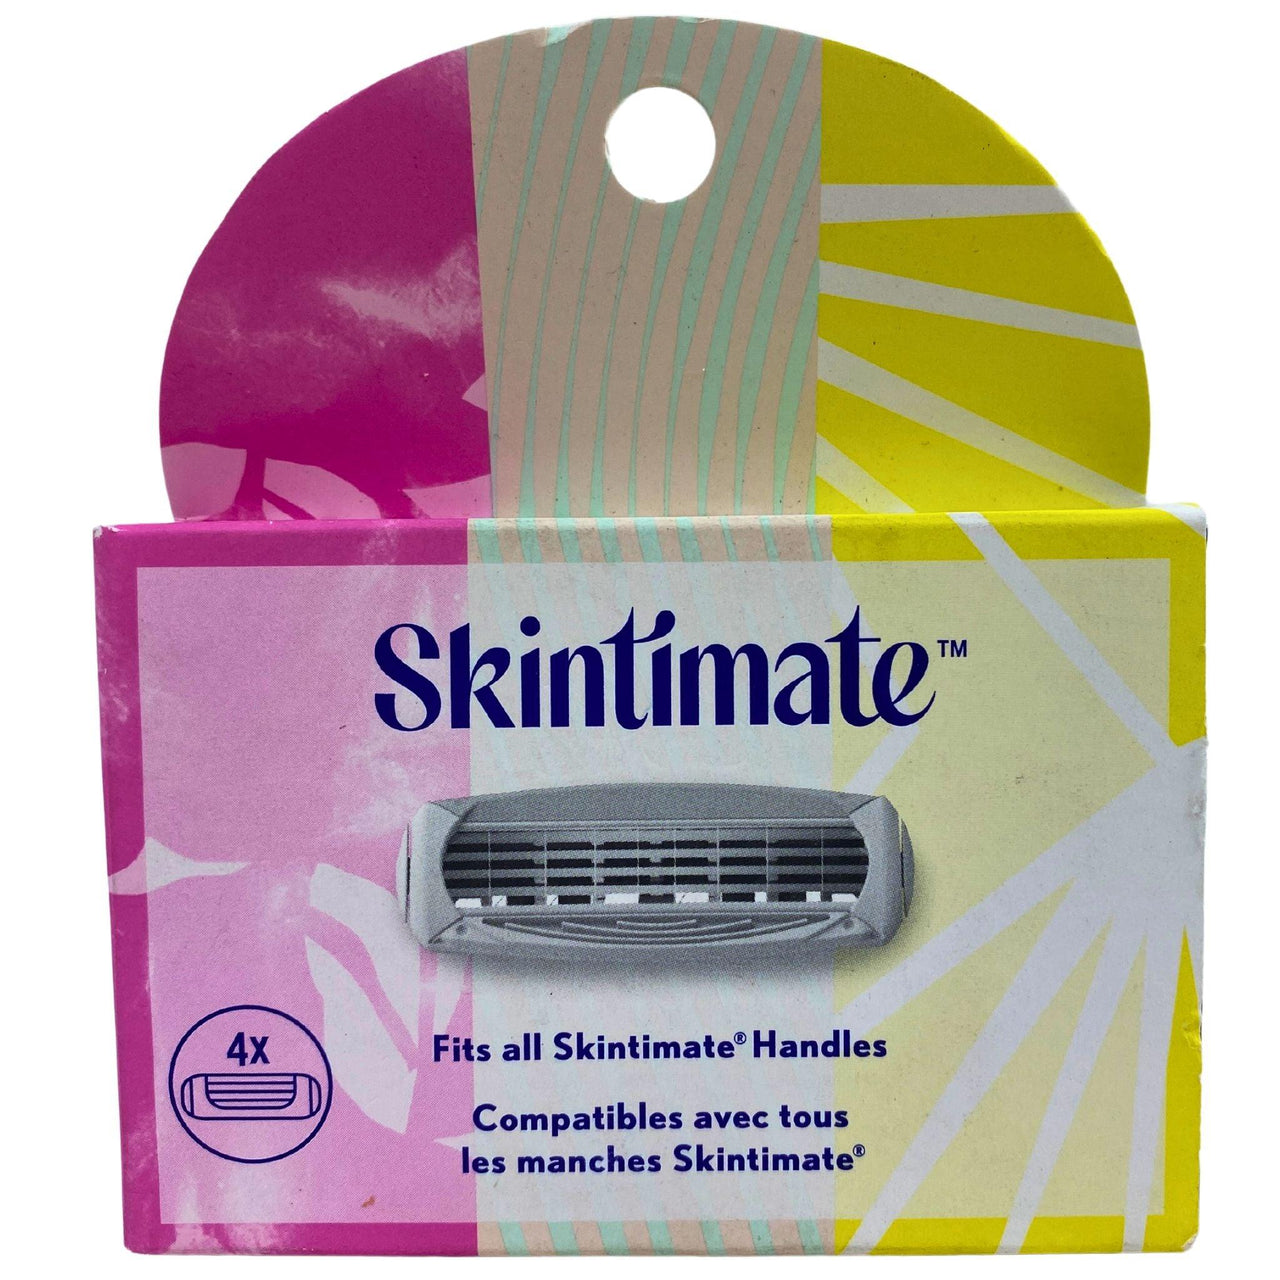 Skintimate Fits All Skintimate Handles 4 Ultra Thin Blades (50 Pcs Lot) - Discount Wholesalers Inc